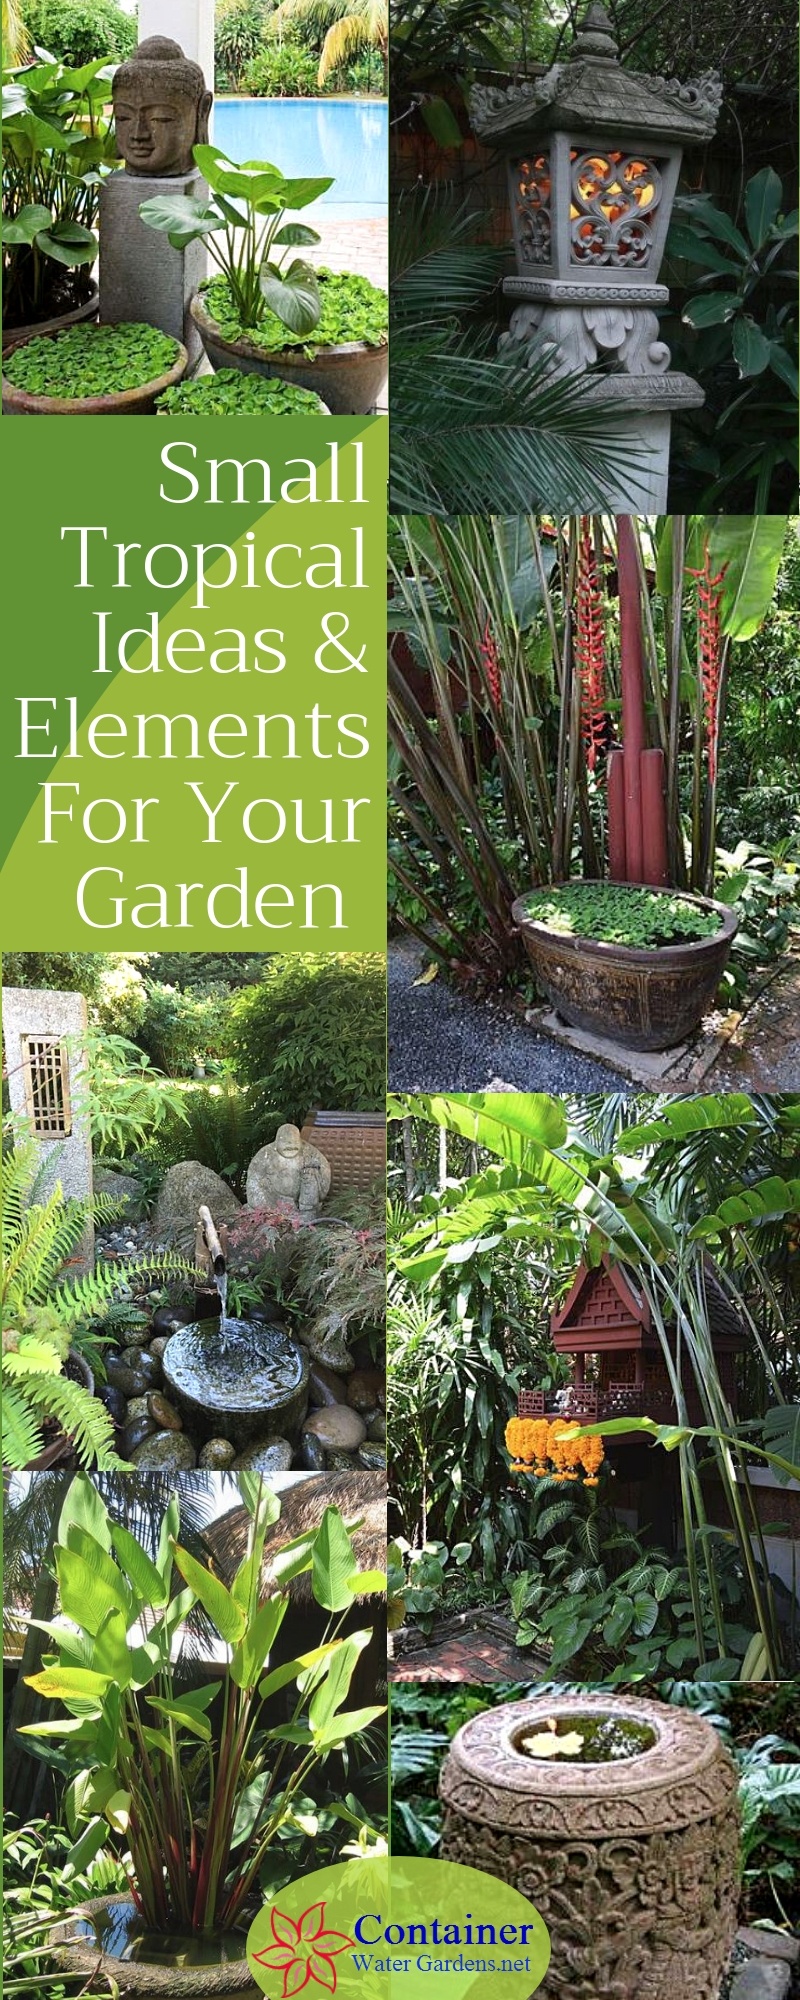 Small Tropical Ideas & Elements For Your Garden